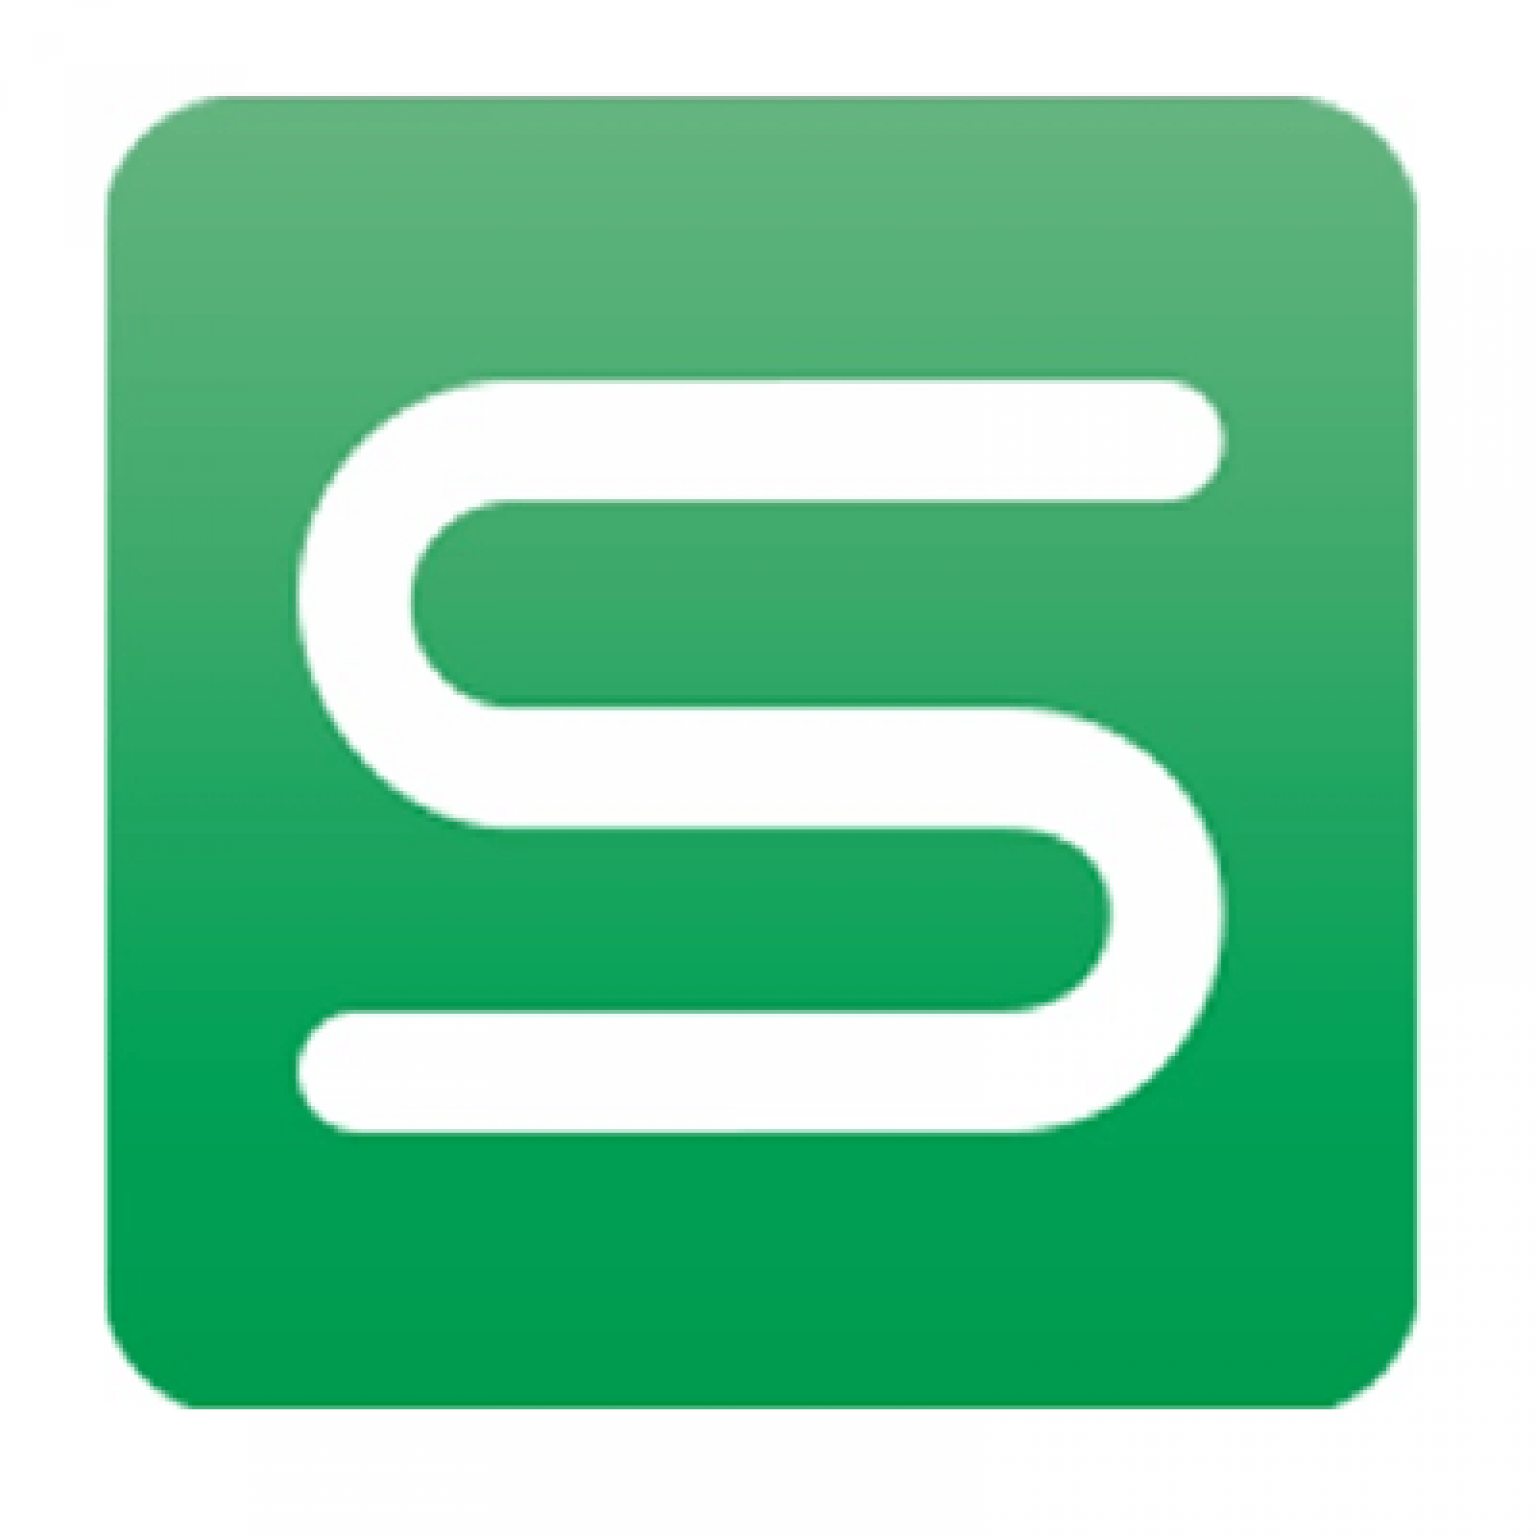 wps-office-spreadsheets-software-download-review